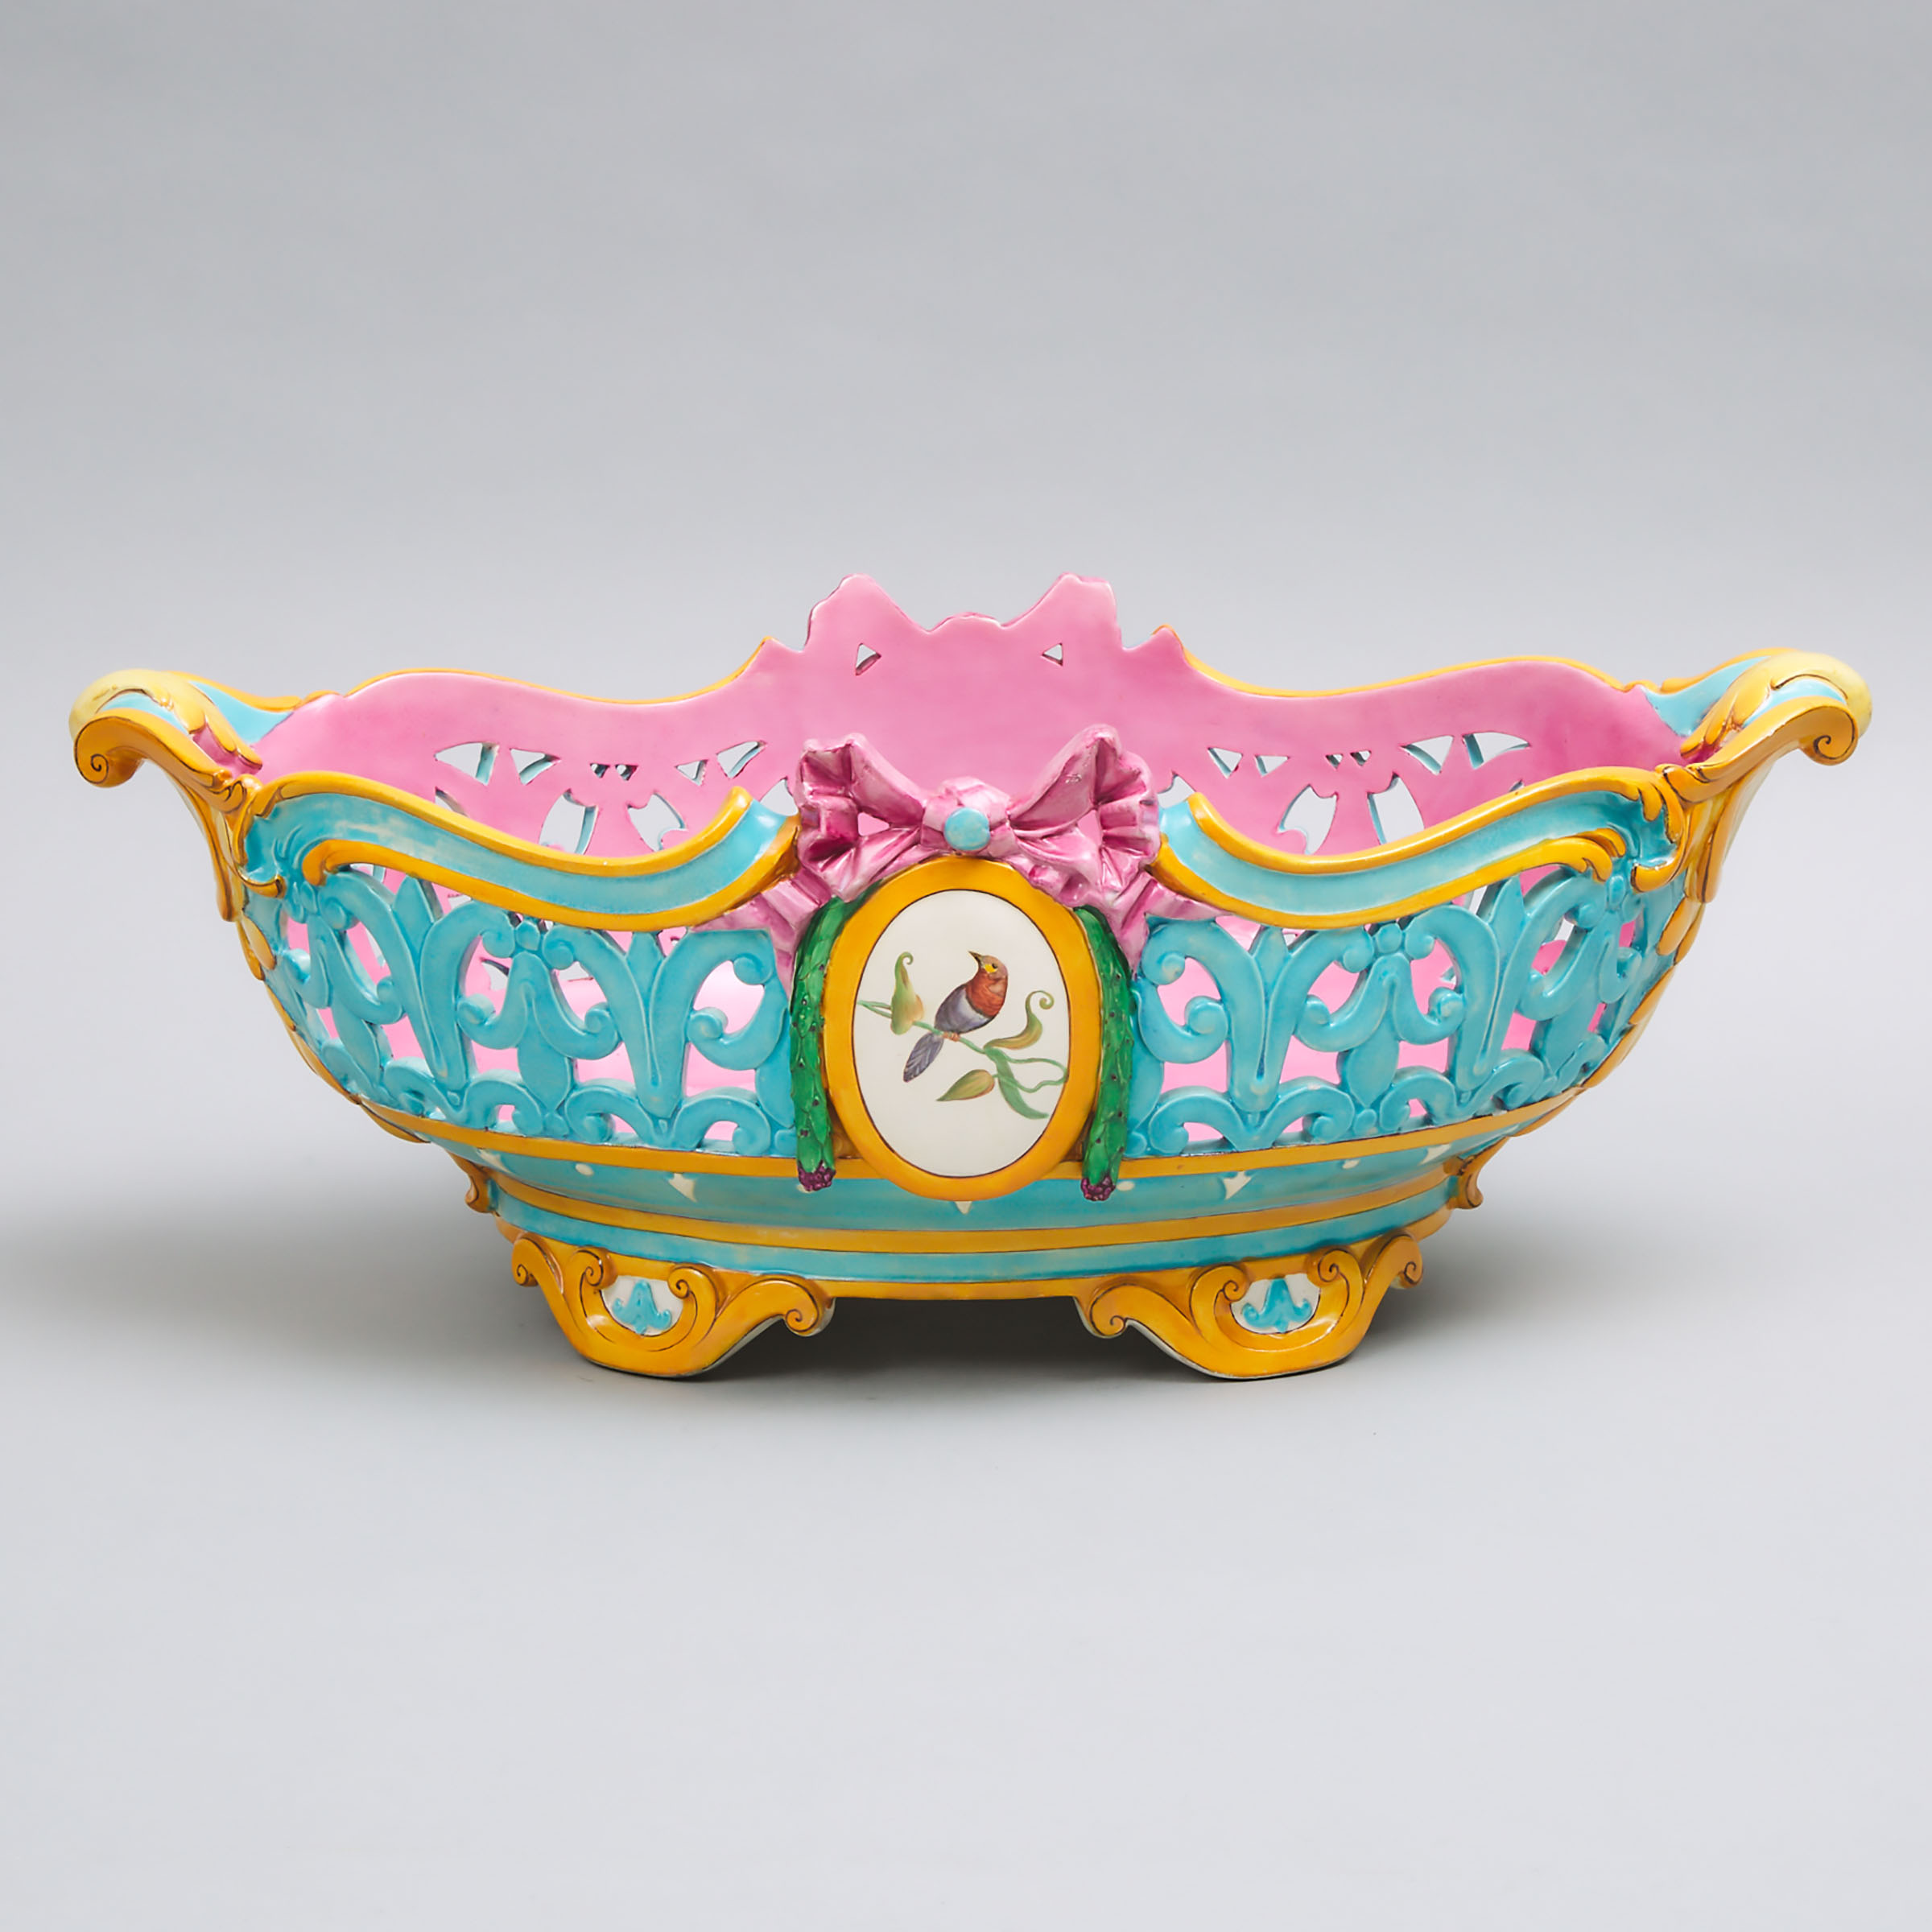 Wedgwood Reticulated Majolica Oval Centrepiece, 1872